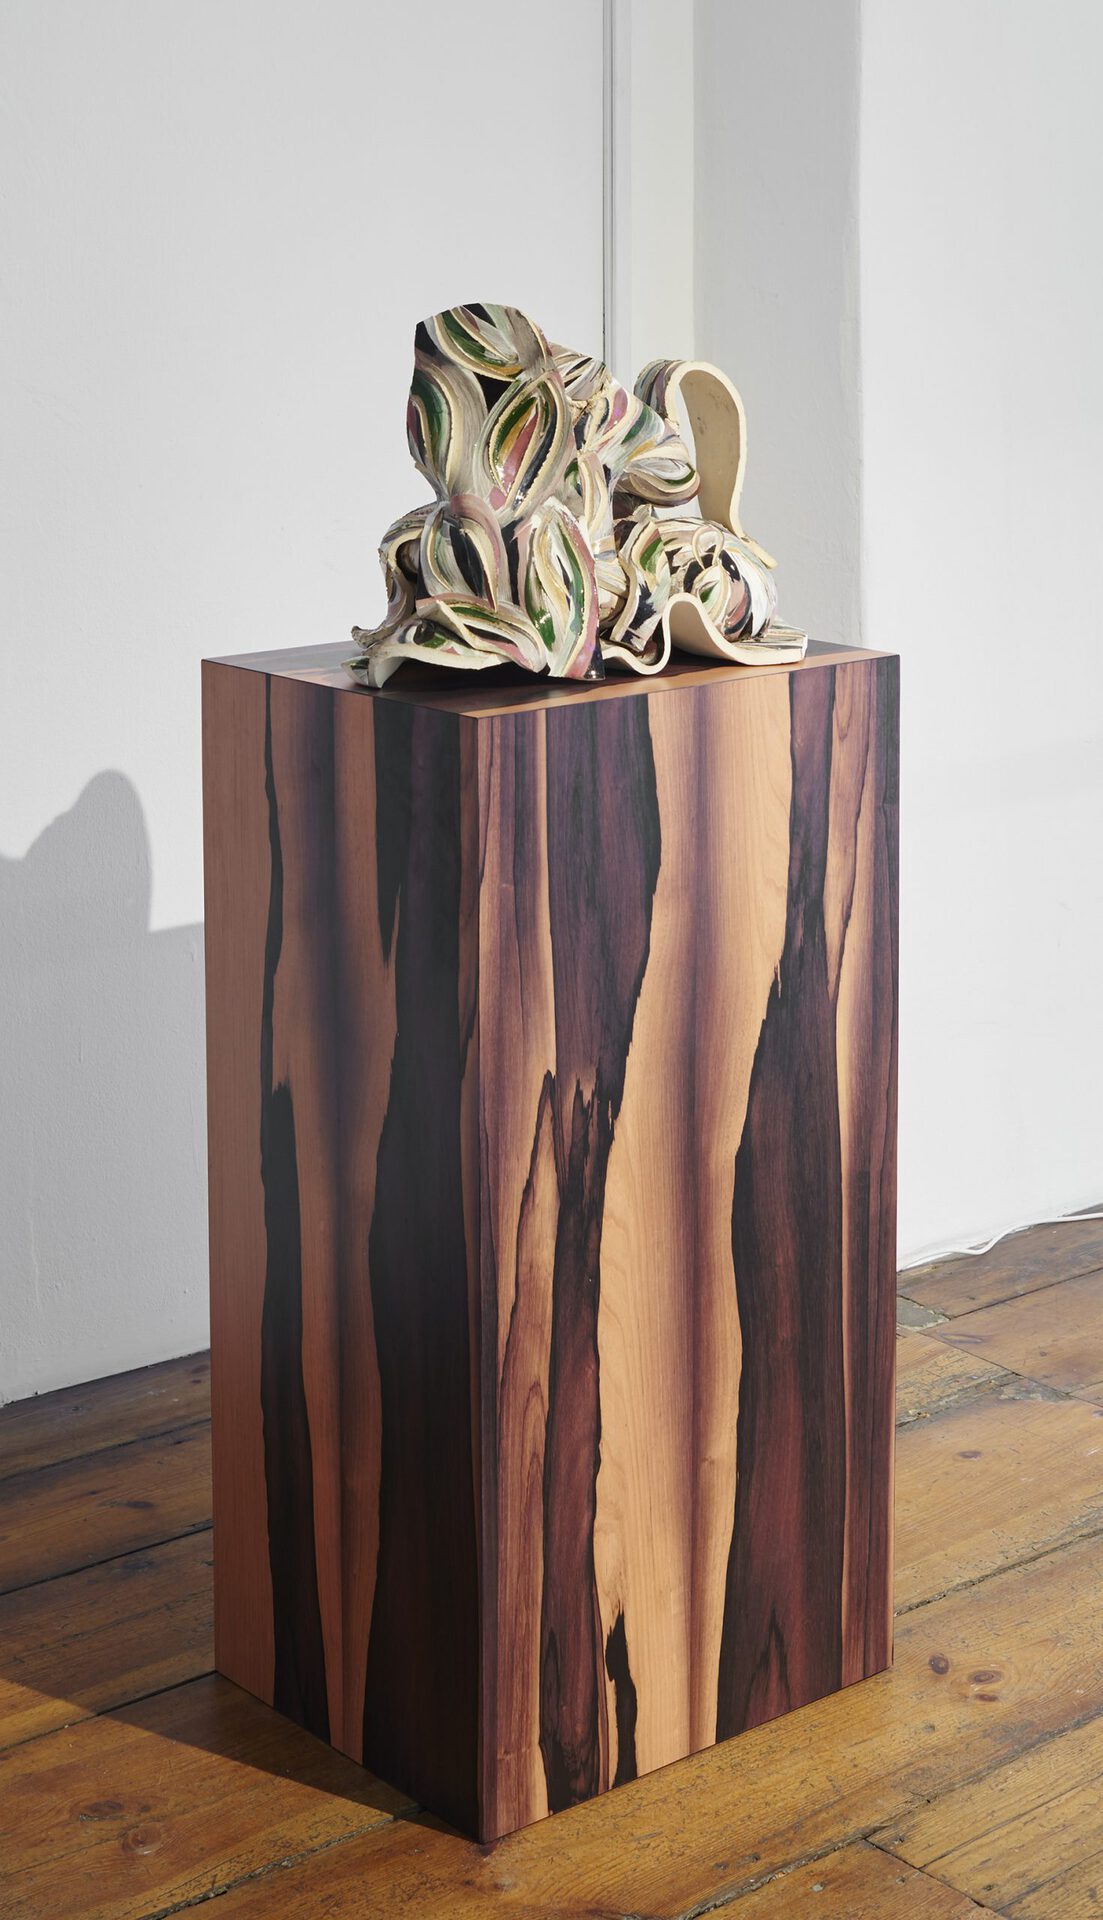 Stephen Kent, And I Will Meet You Behind Your Eyelids (Leaning Vase), 2020, fired ceramics, engobe, glaze, wood, laminate, 130 cm H x 49 cm W x 39 cm D